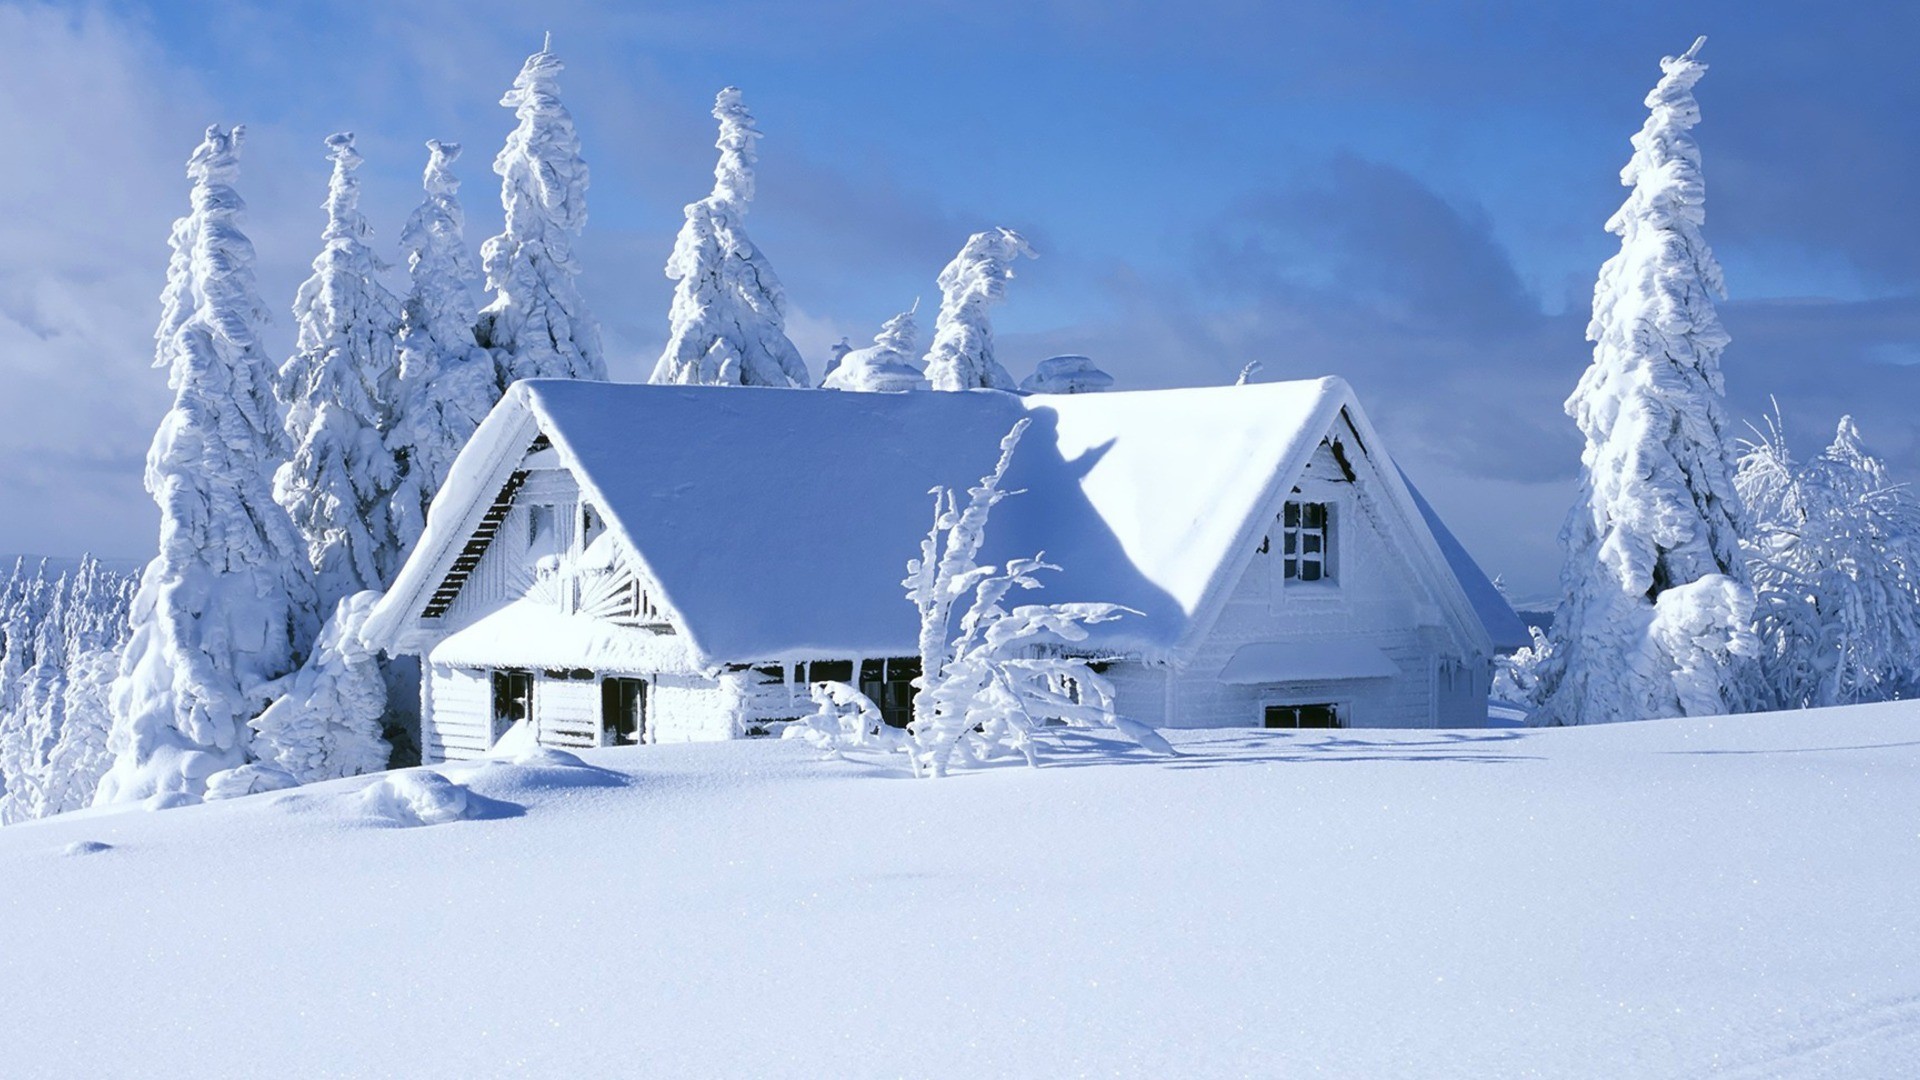 Nature snow forests houses house wallpaper 1920x1080.jpg